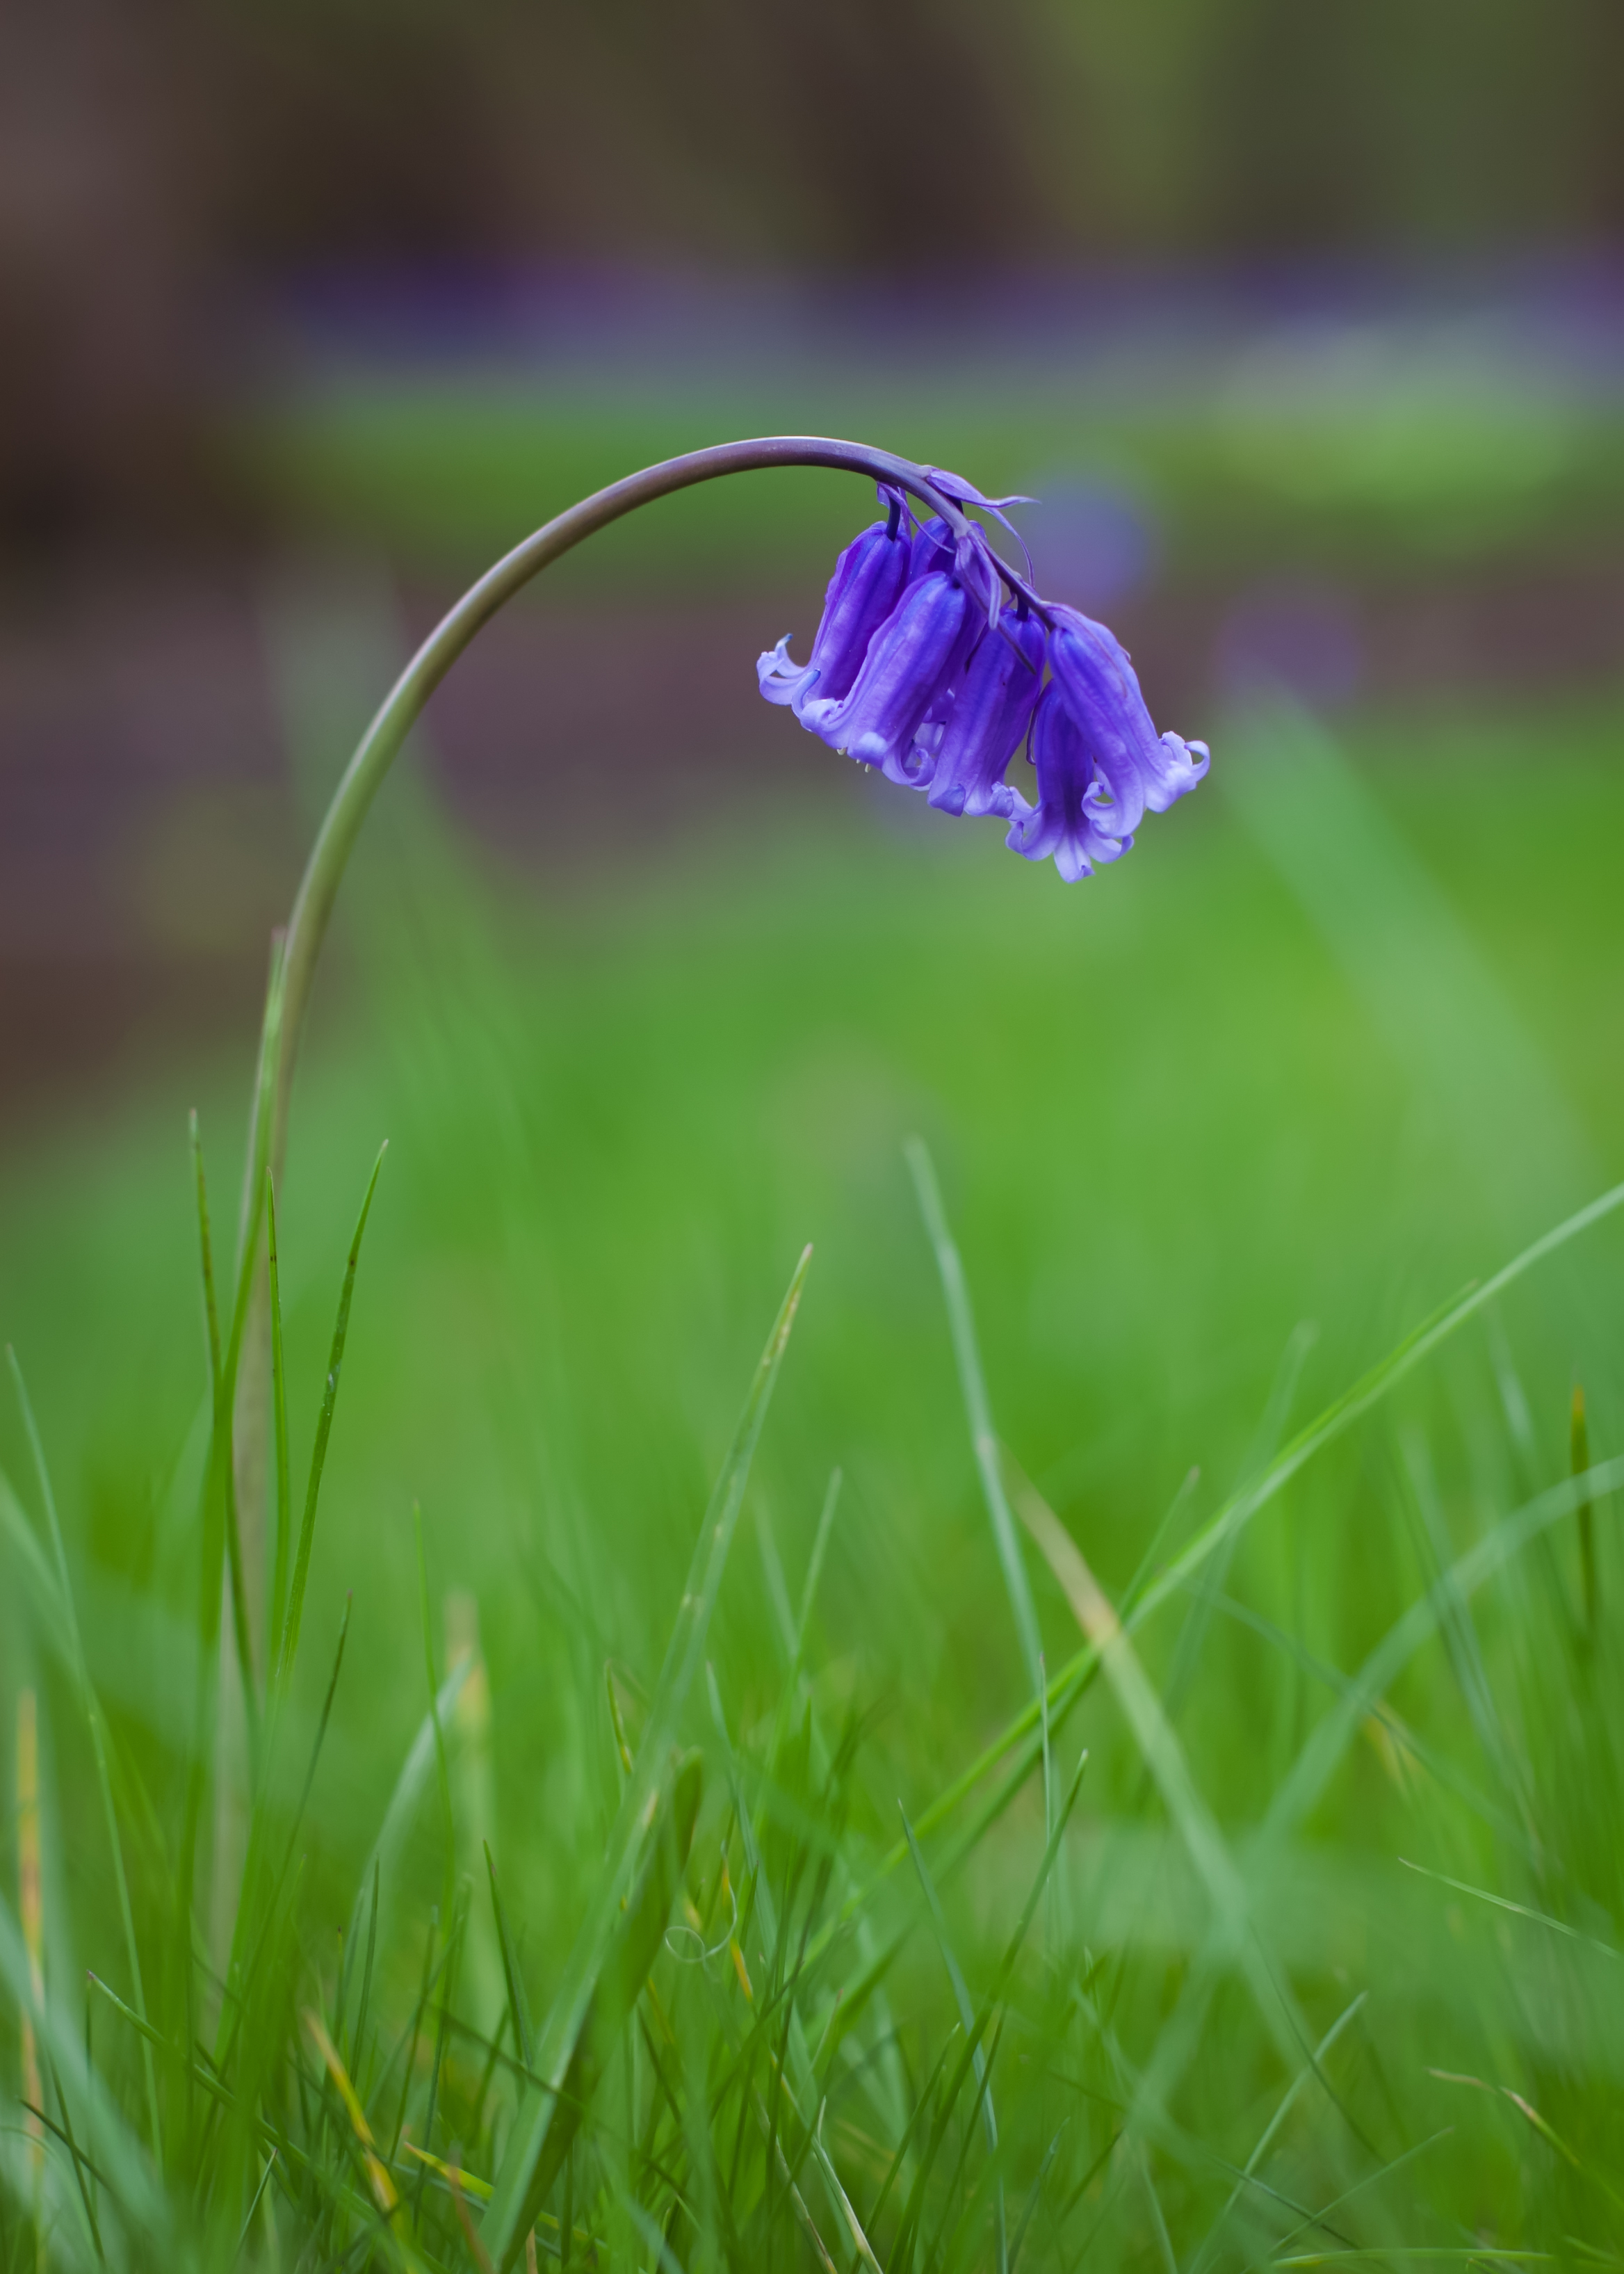 134865 Screensavers and Wallpapers Bluebells for phone. Download flowers, grass, bluebells, macro, blur, smooth, field pictures for free